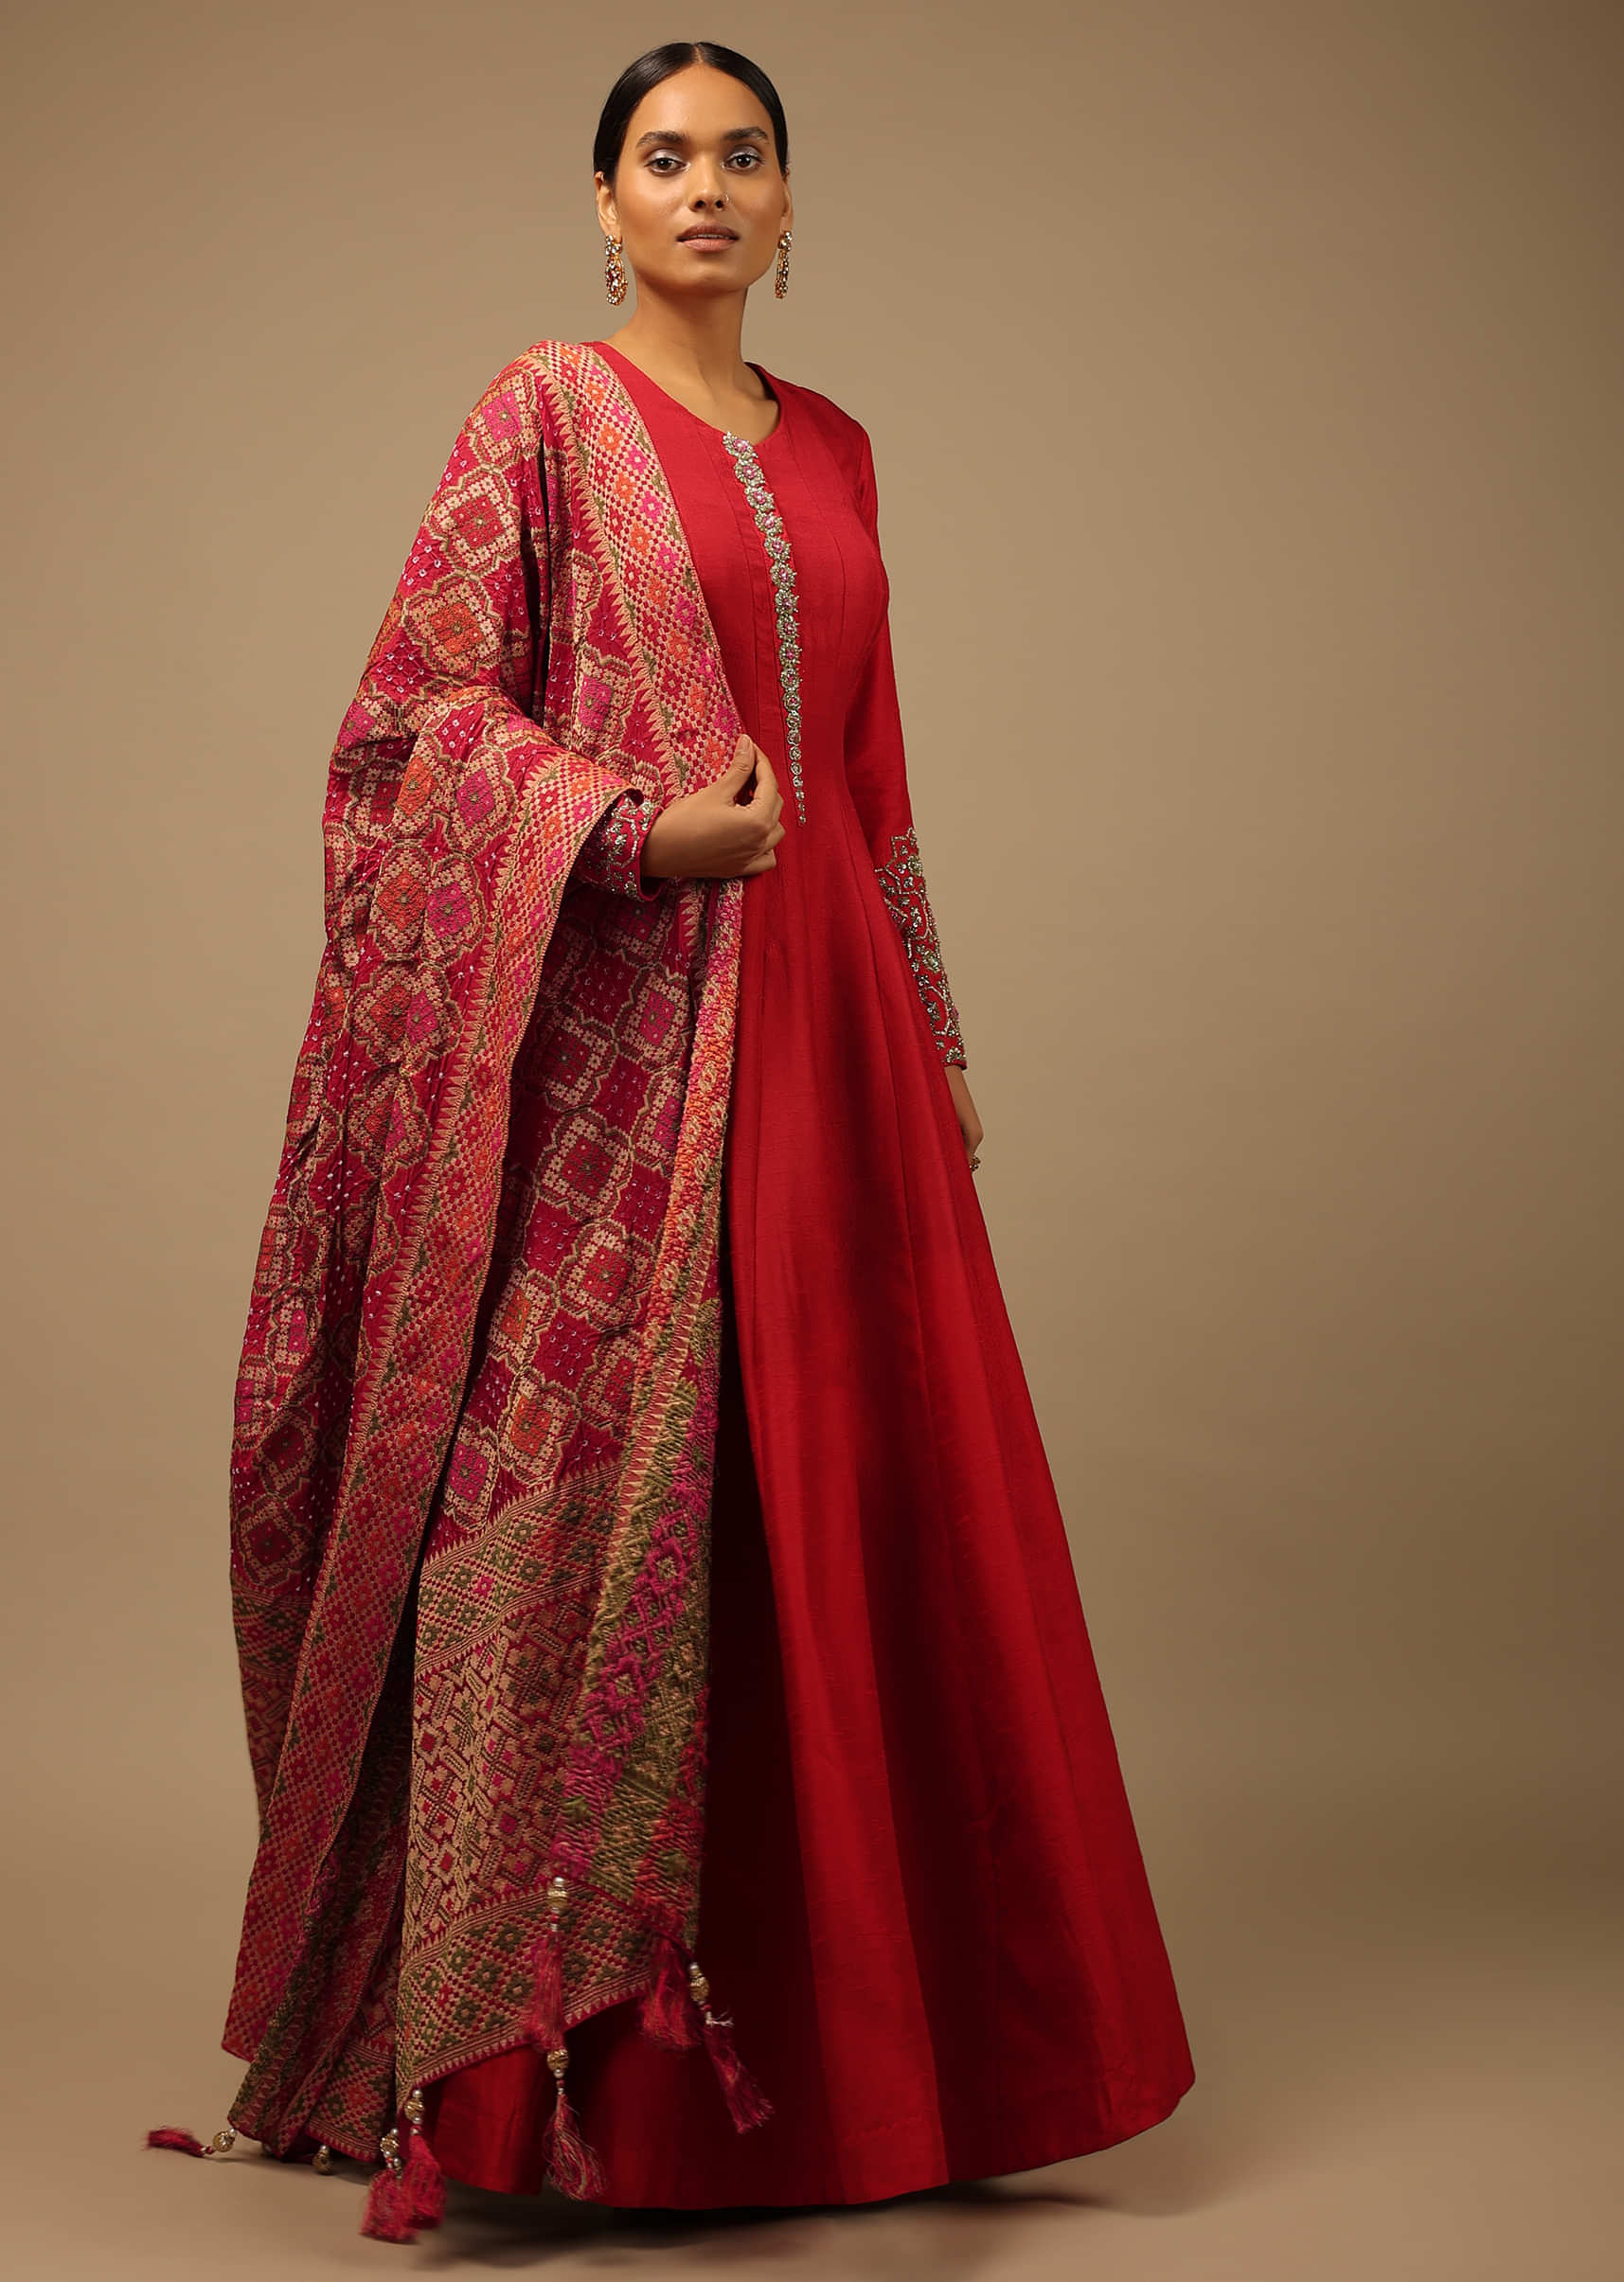 Red Anarkali Suit In Raw Silk With Hand Embroidery And A Brocade Dupatta Enhanced With Bandhani 